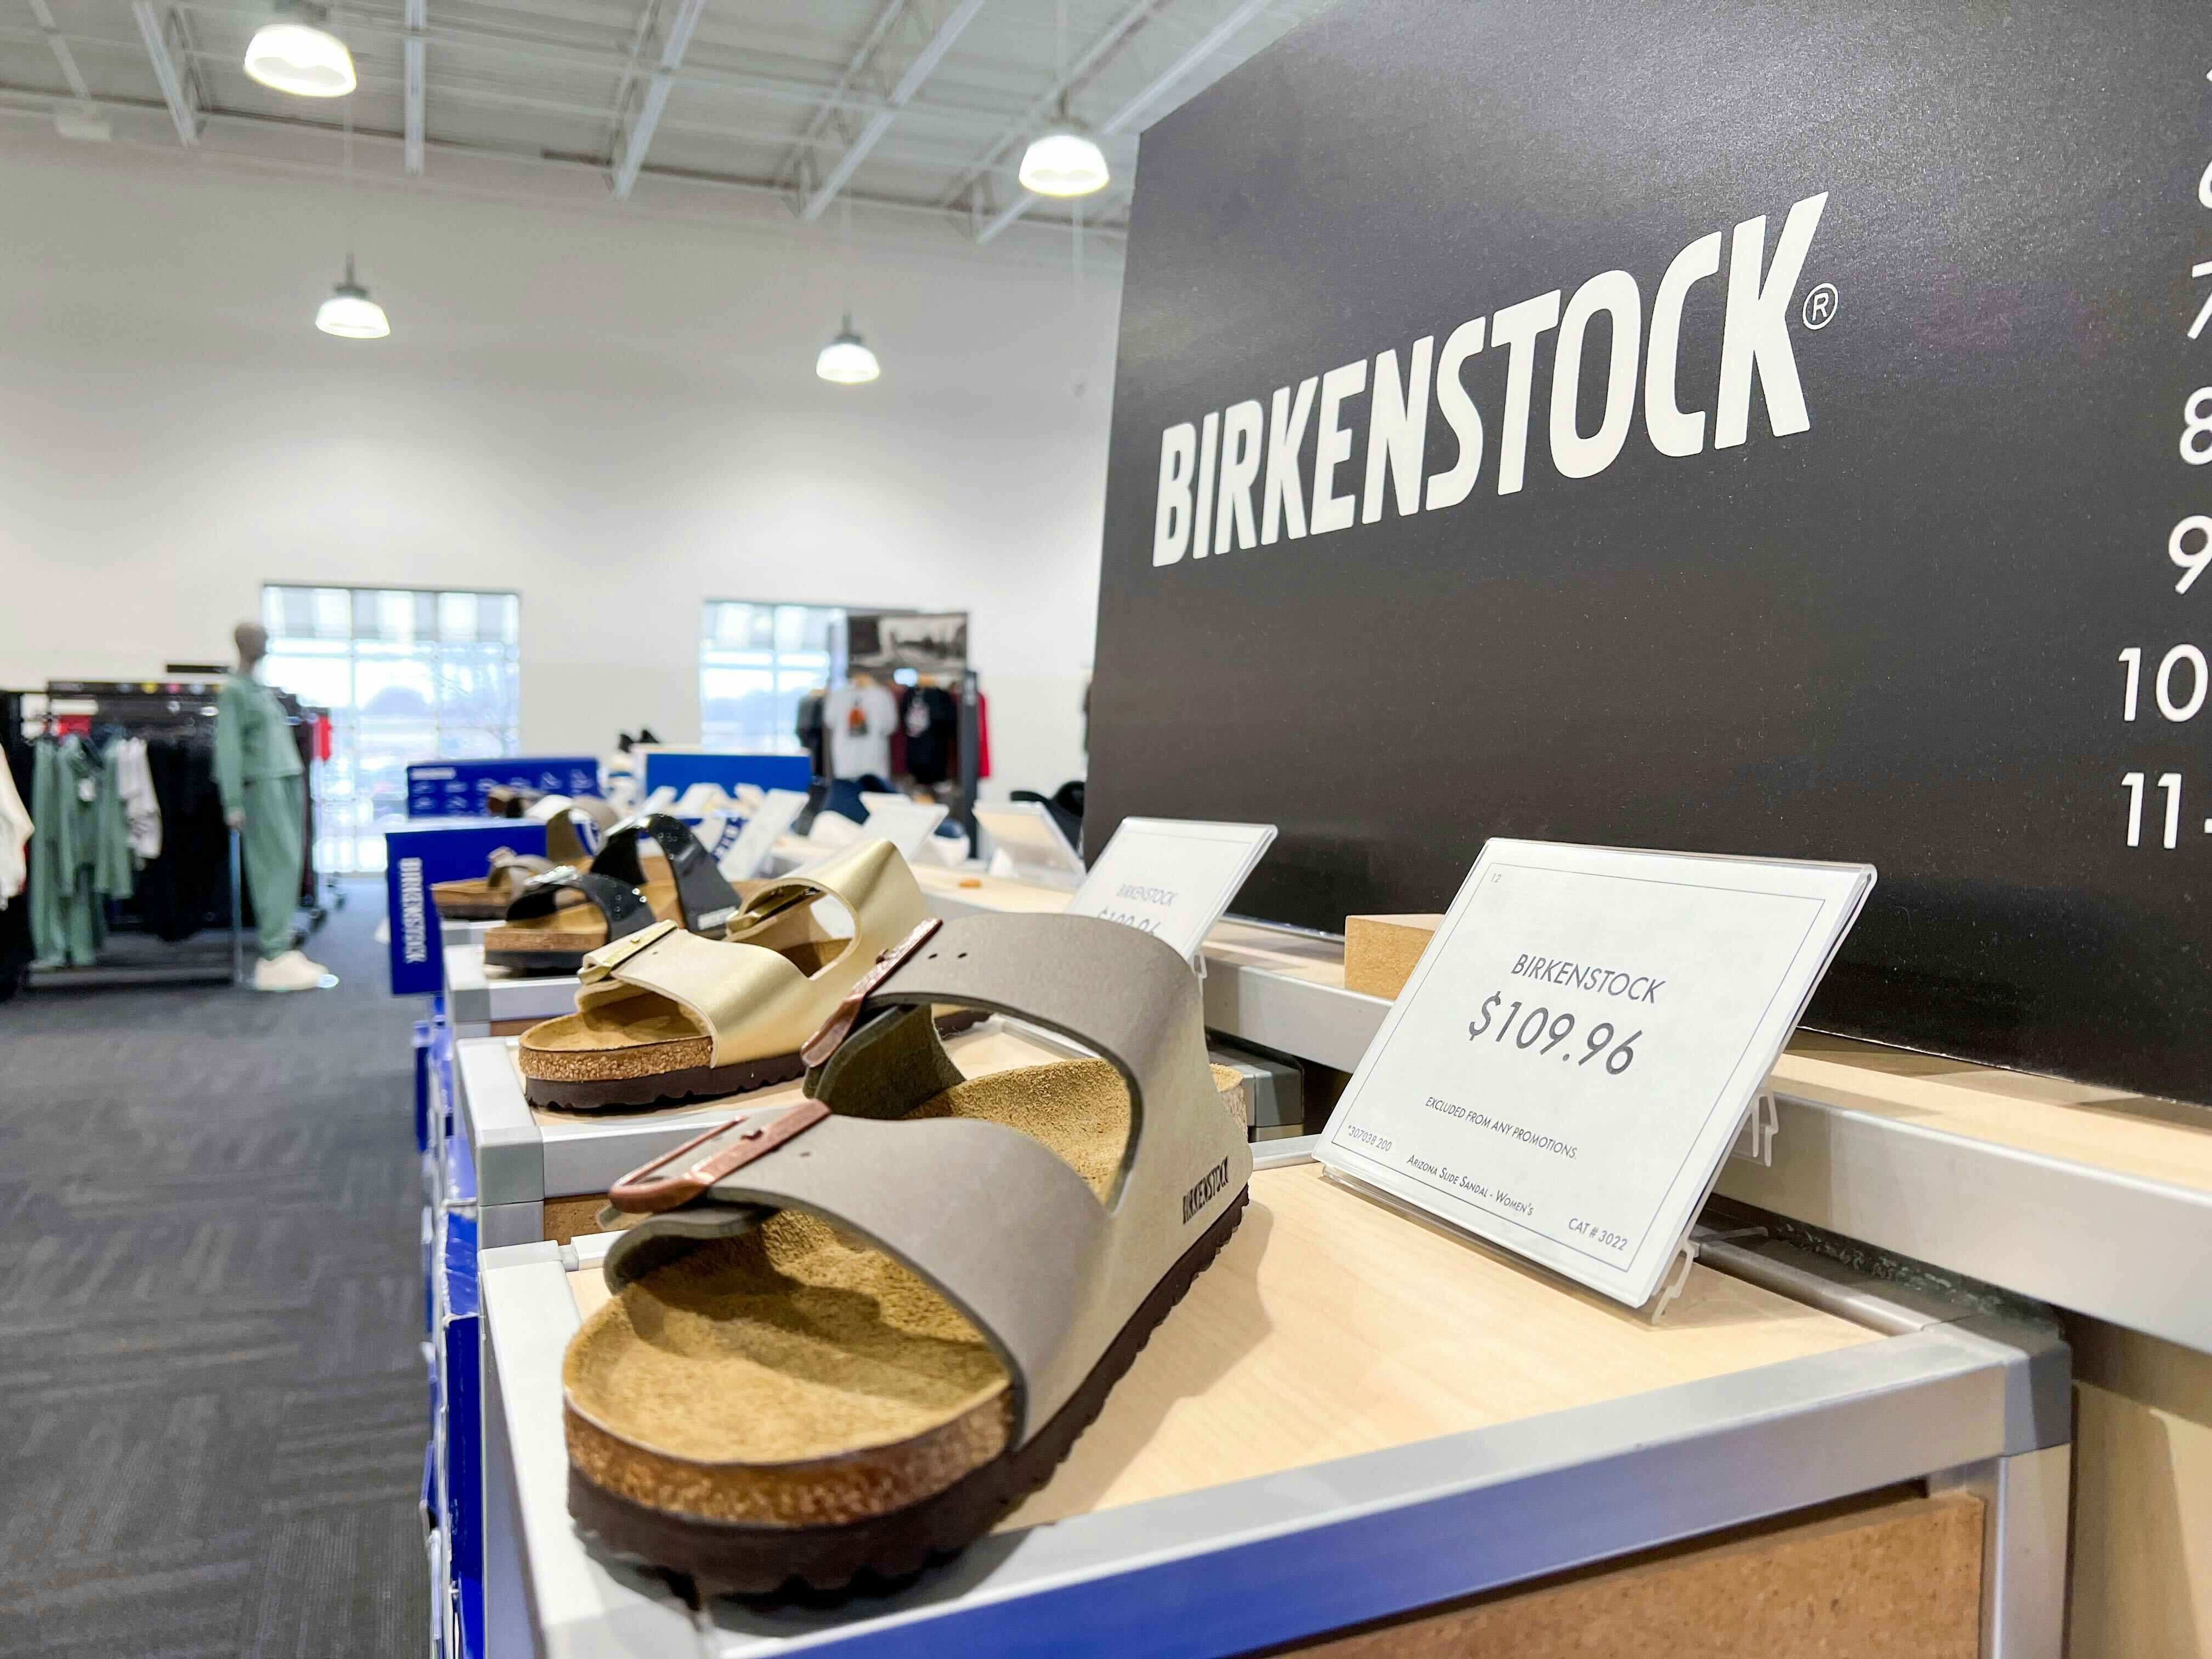 Birkenstock Sandals Deals at Zappos: EVA as Low as $28, Arizona From $61